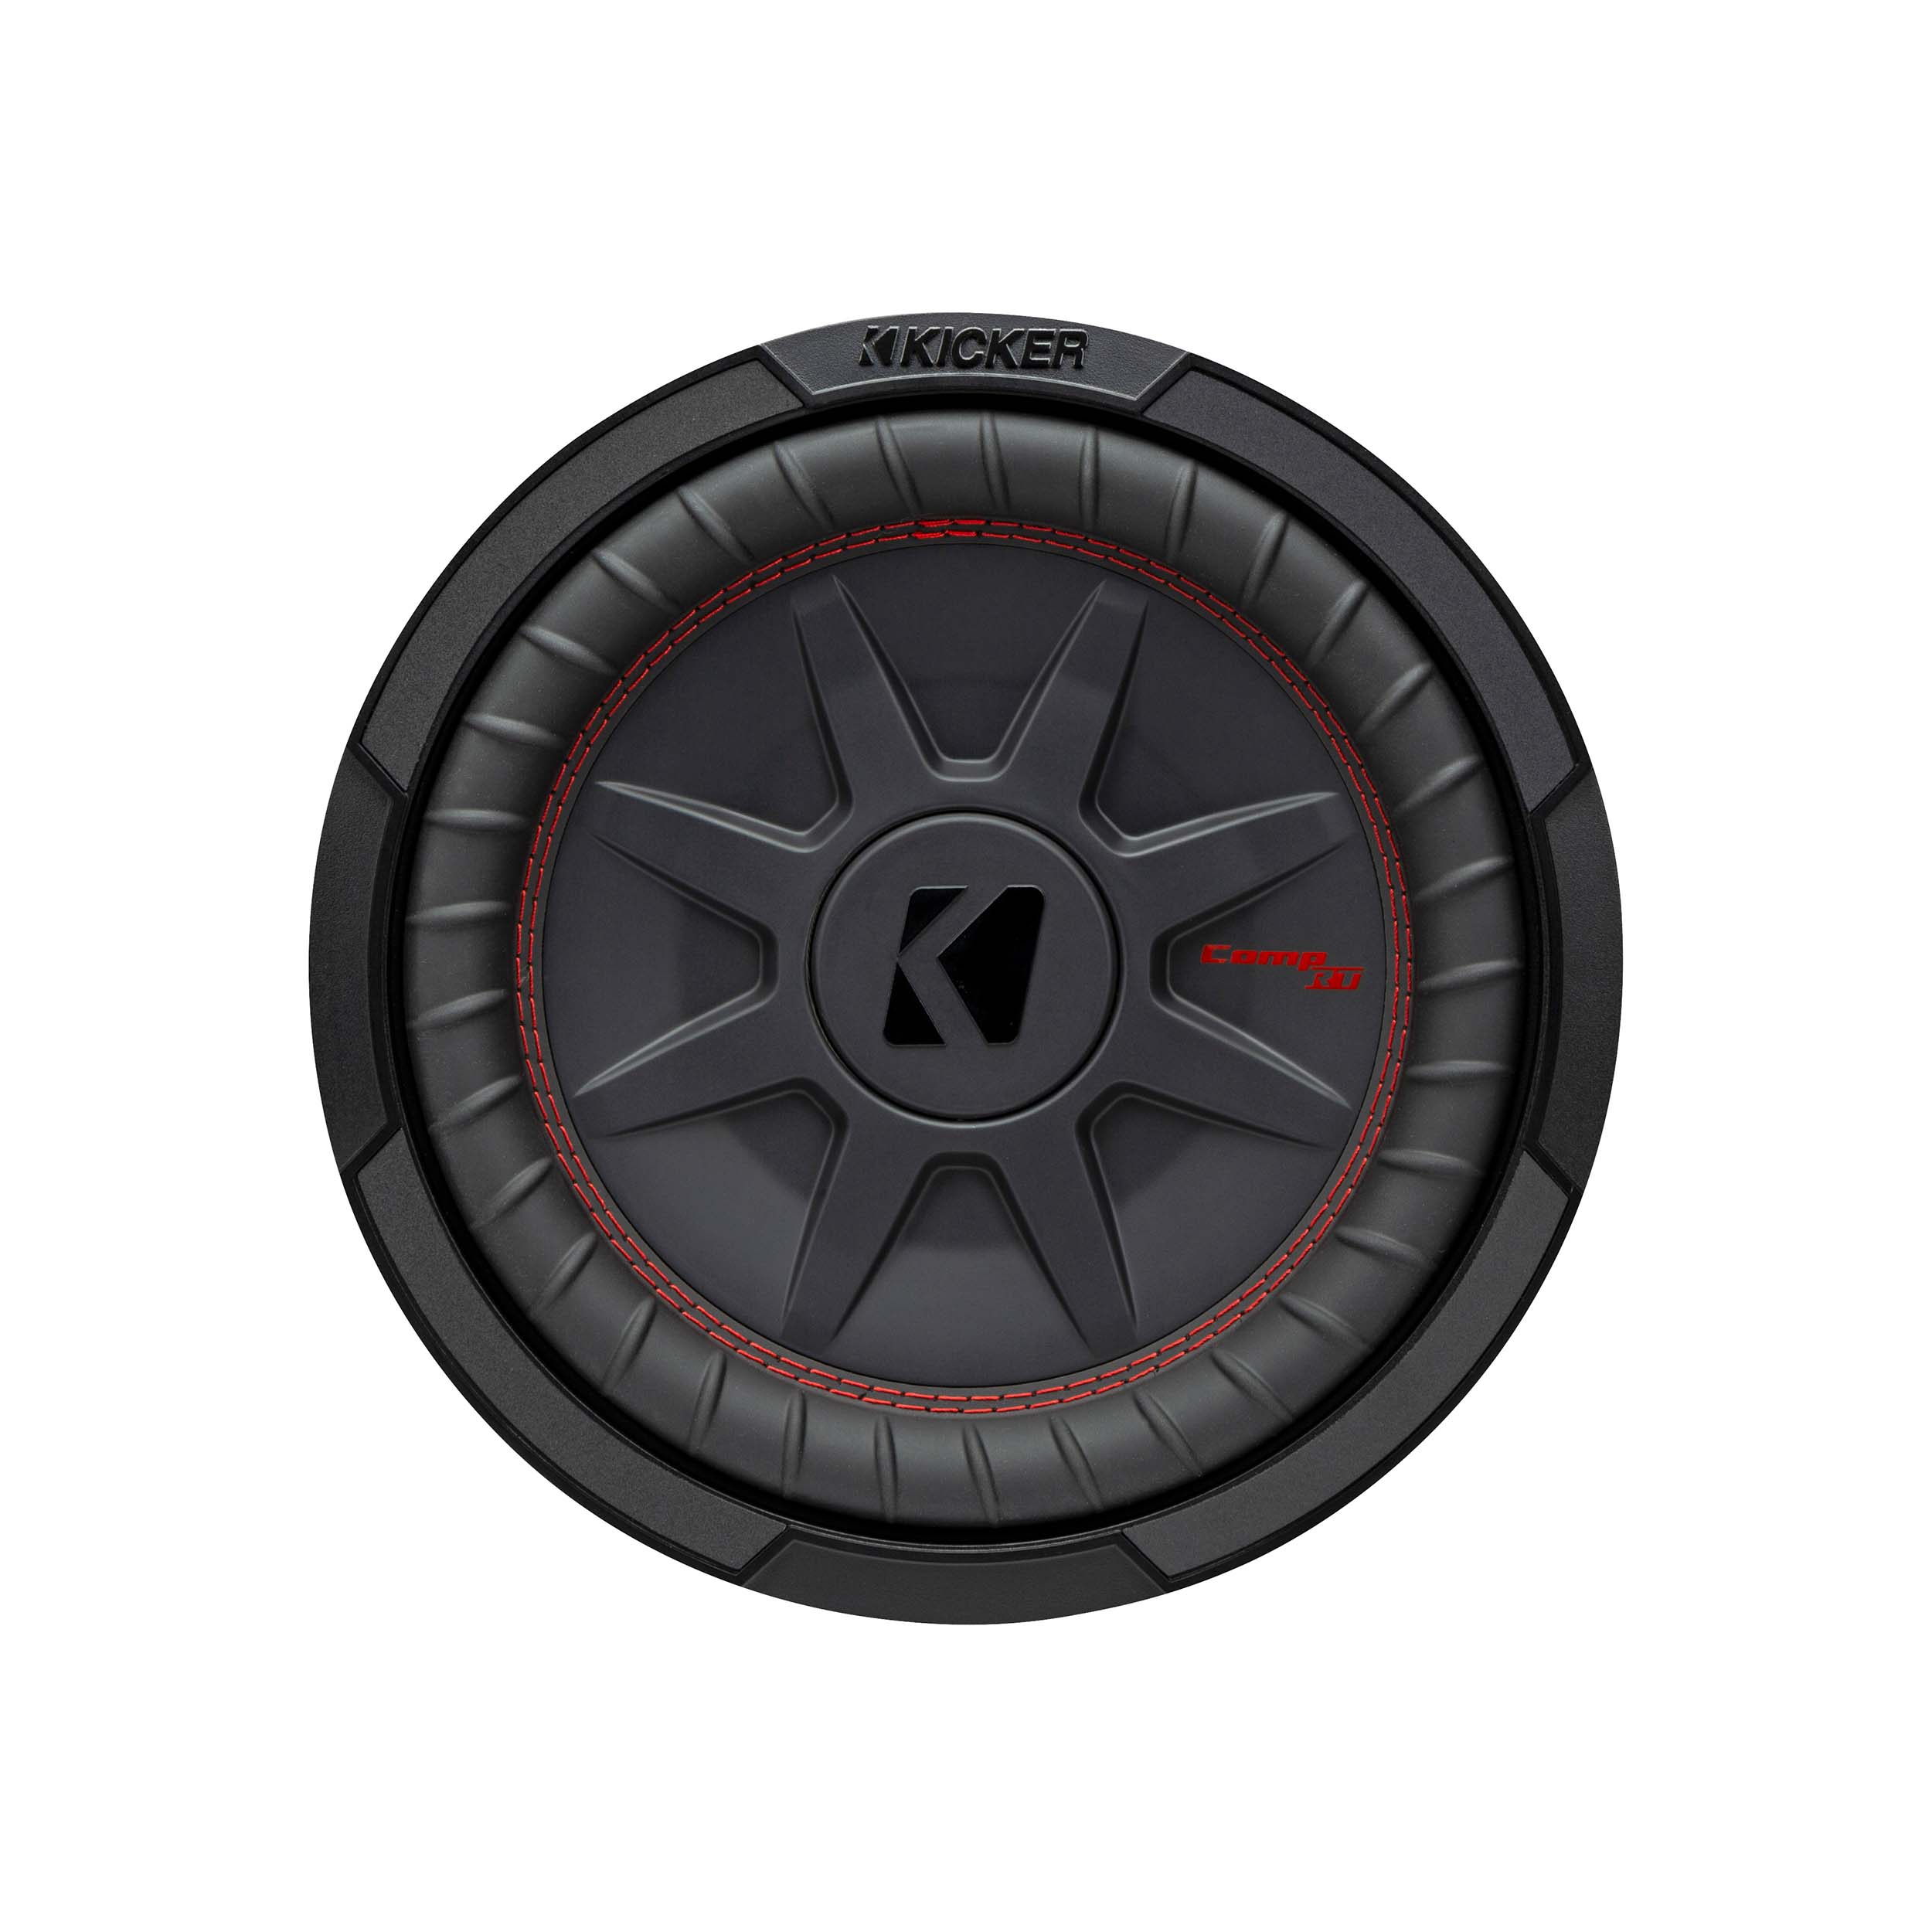 Kicker 48CWRT104 Comp RT 10 Inch Subwoofer 4 Ohm DVC 400W RMS